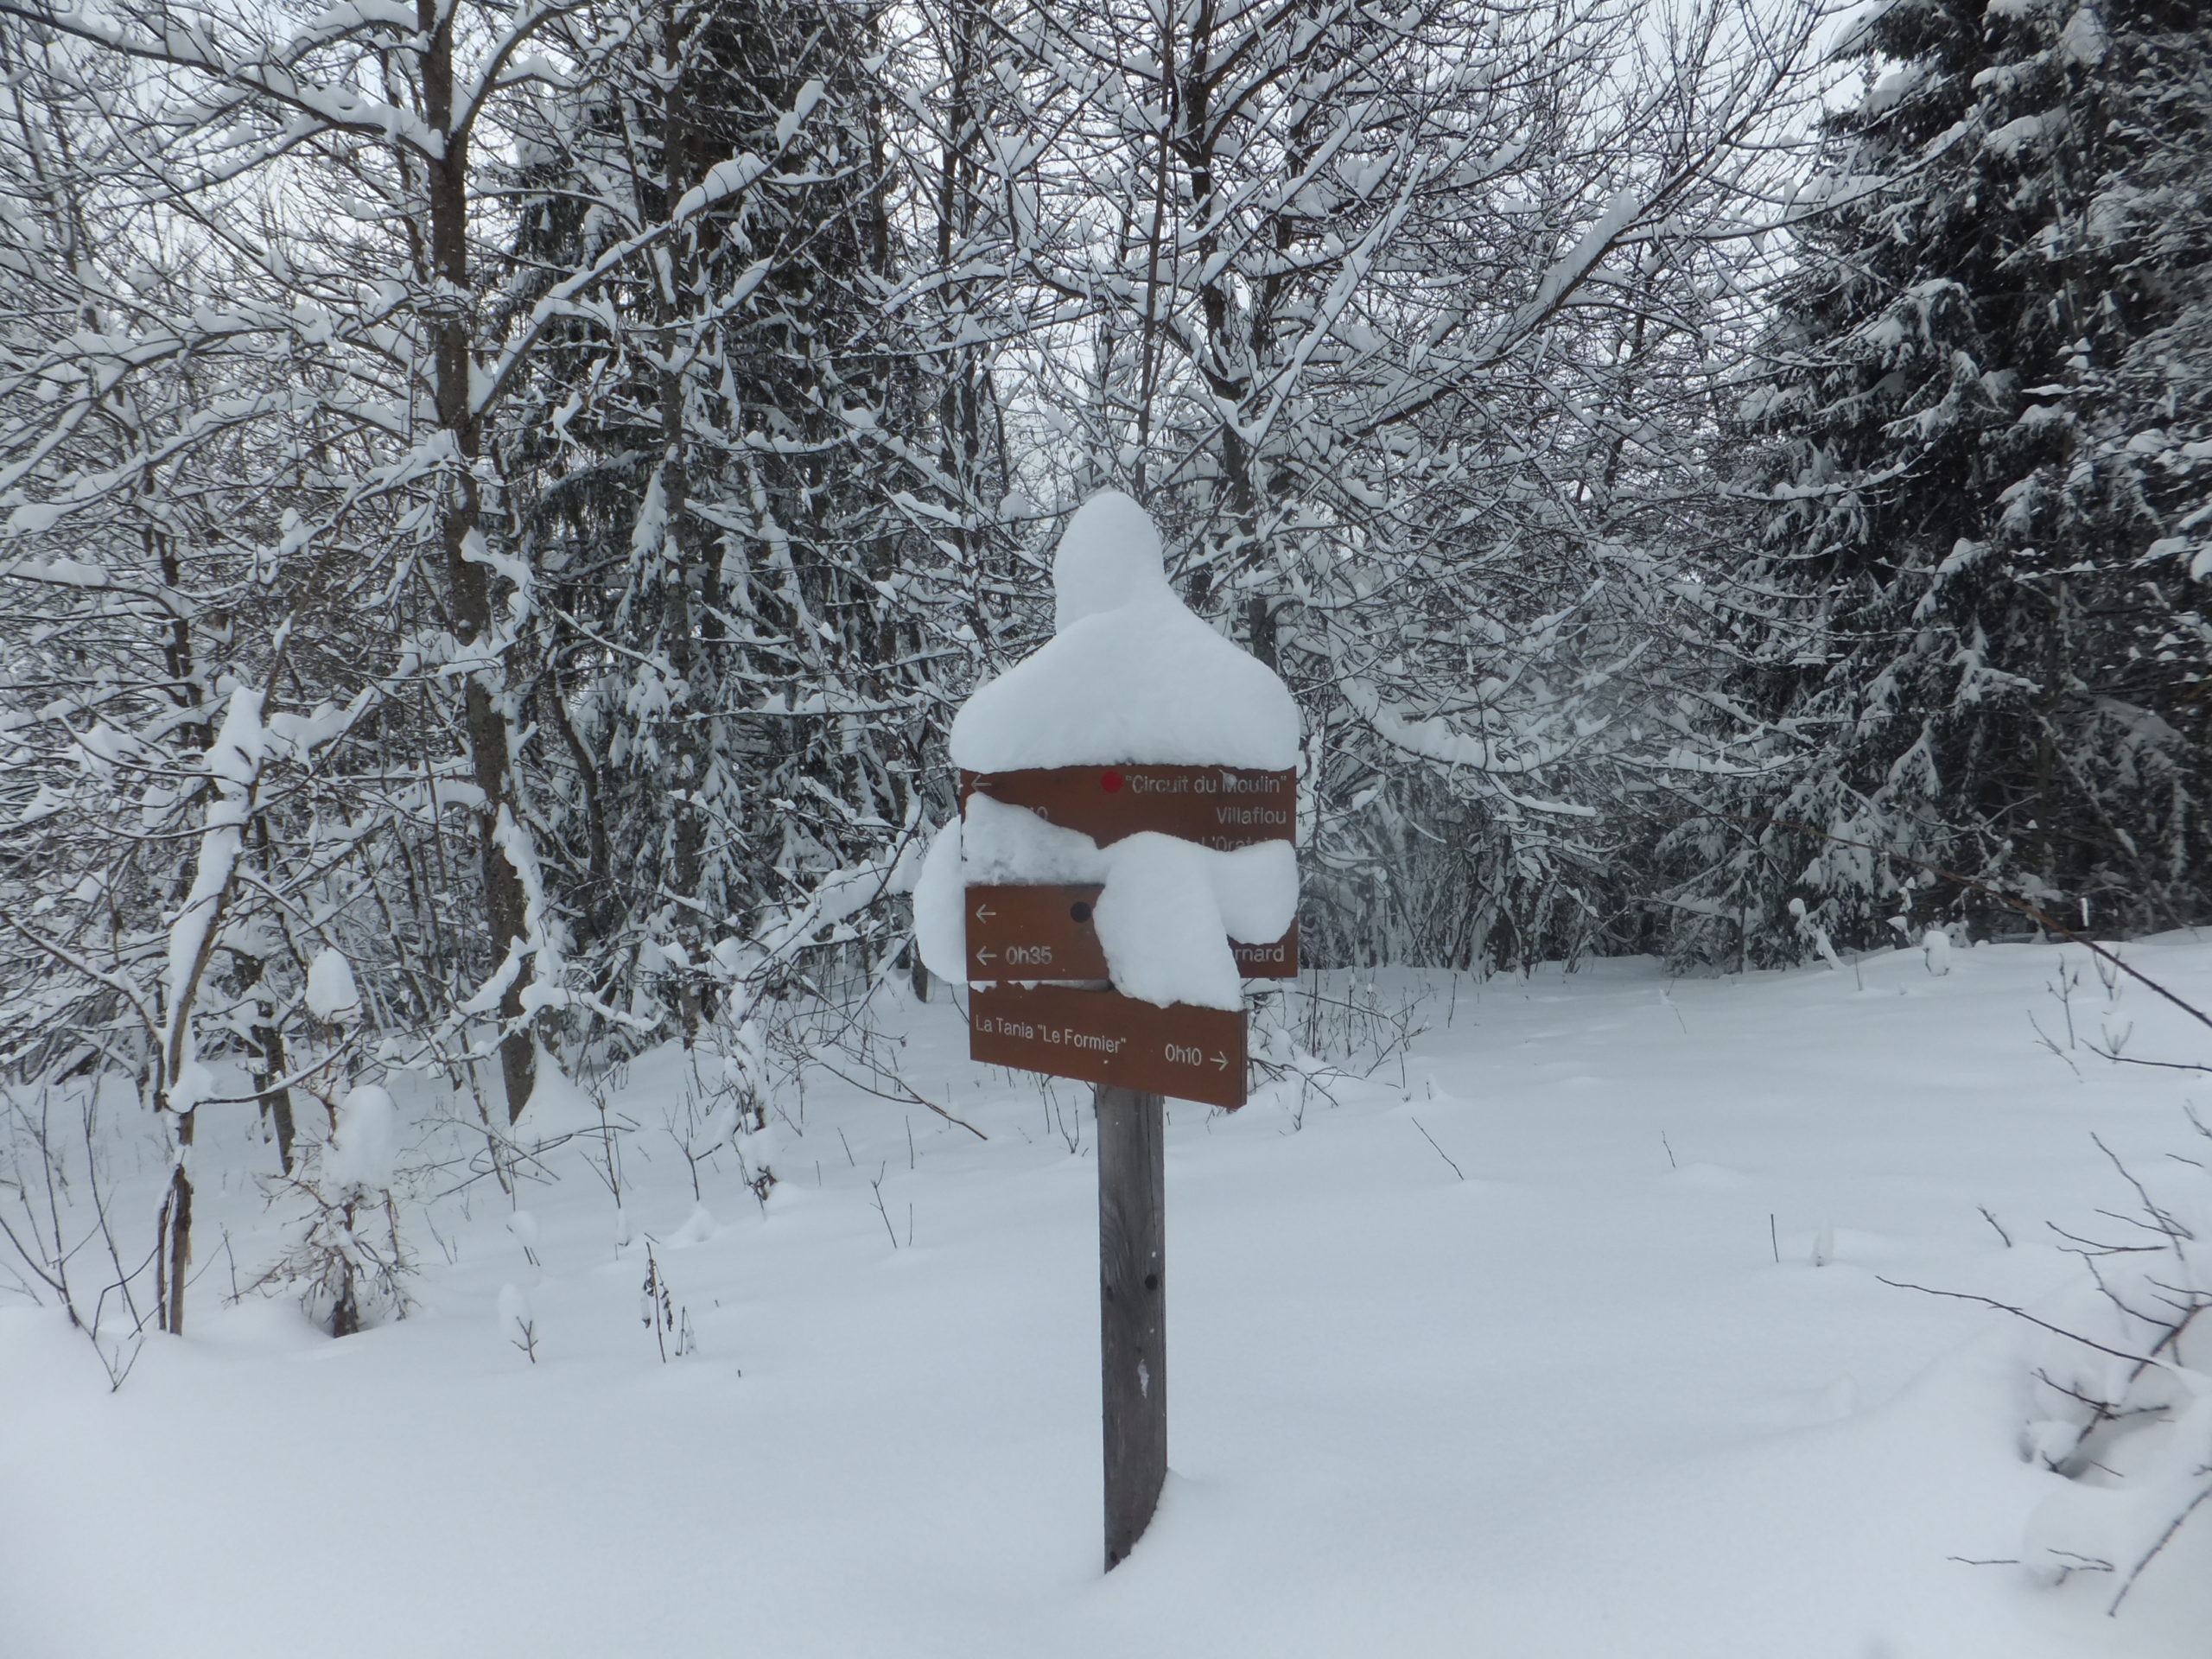 A hiking trail sign outside of La Tania, covered in snow.